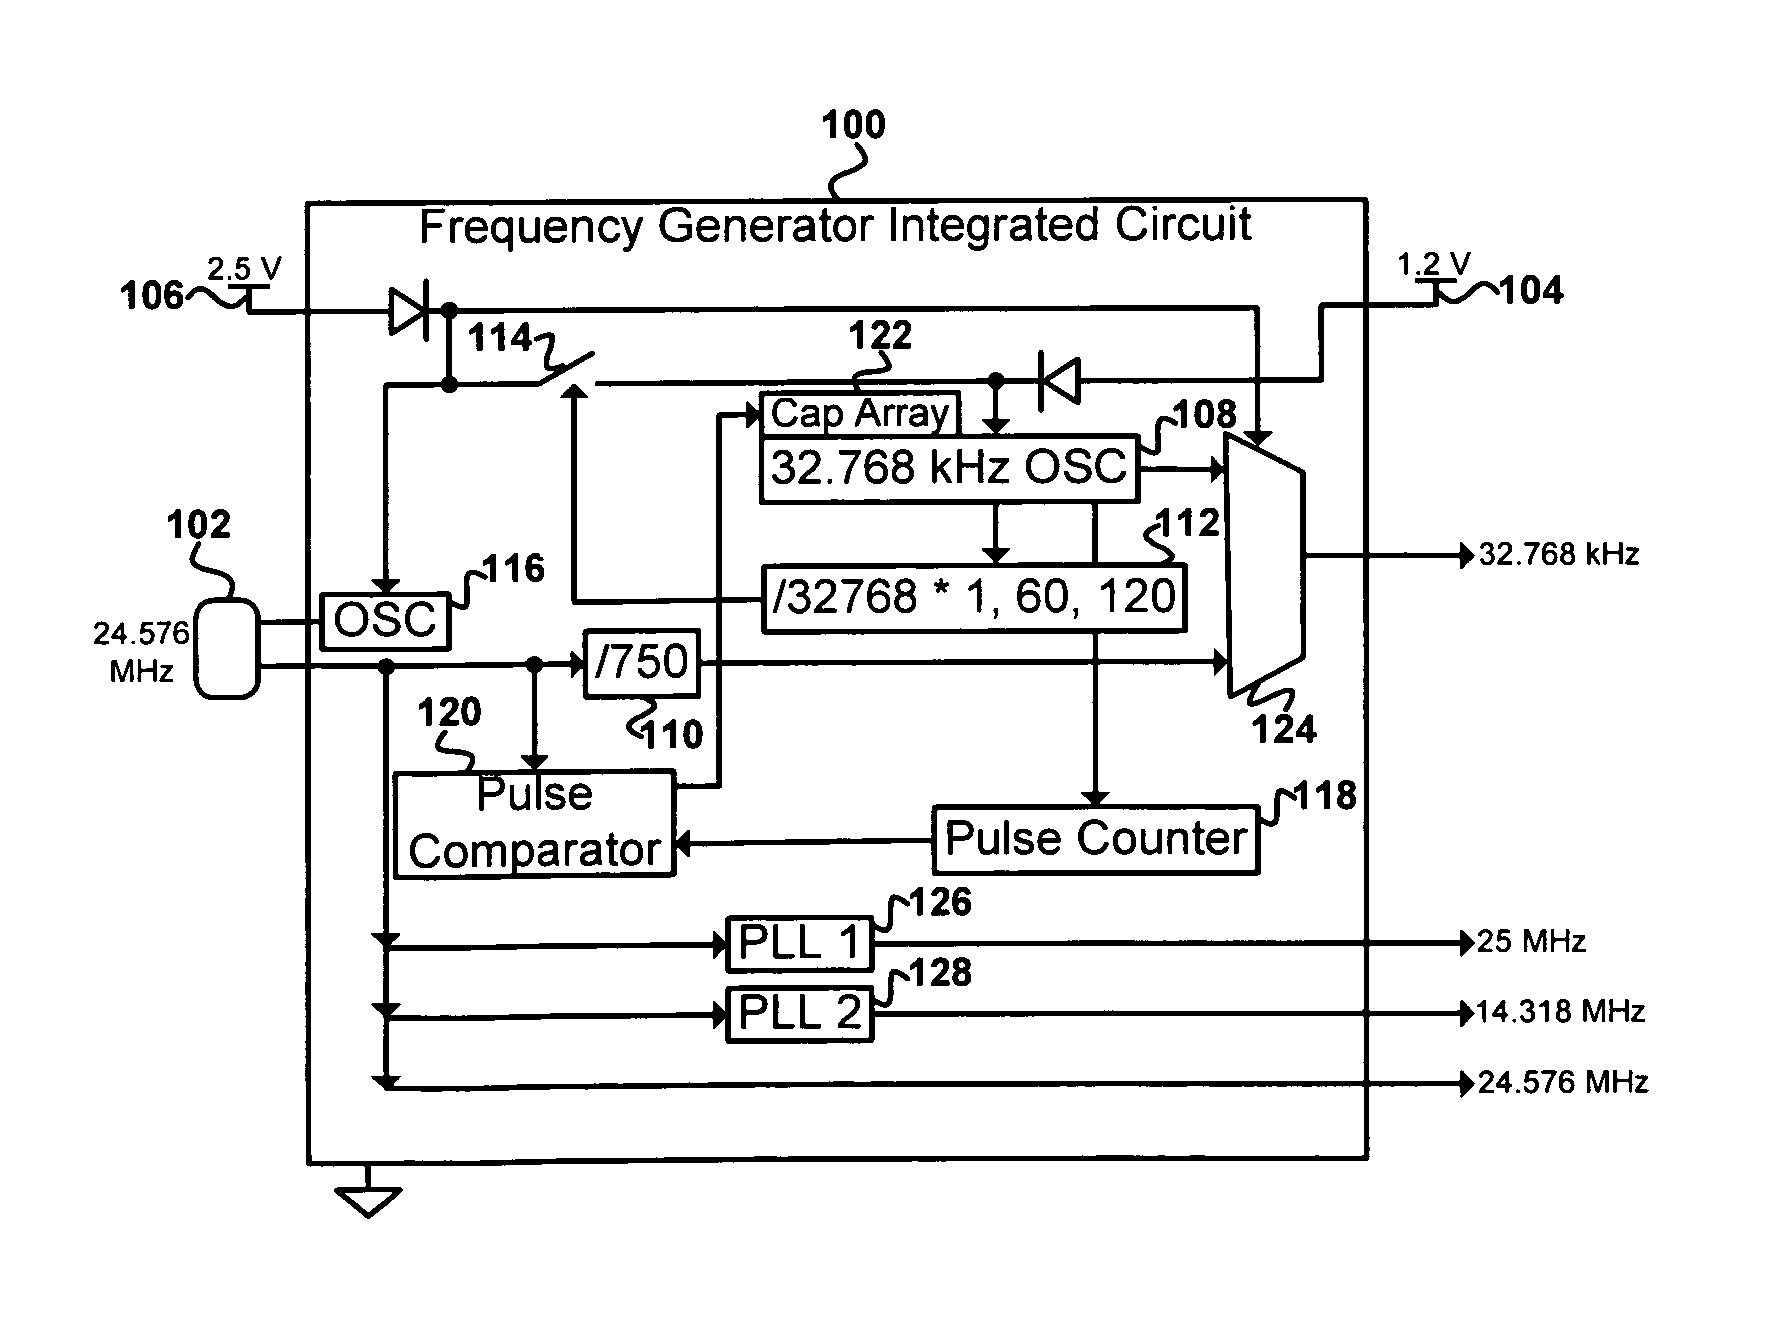 Integrated circuit frequency generator